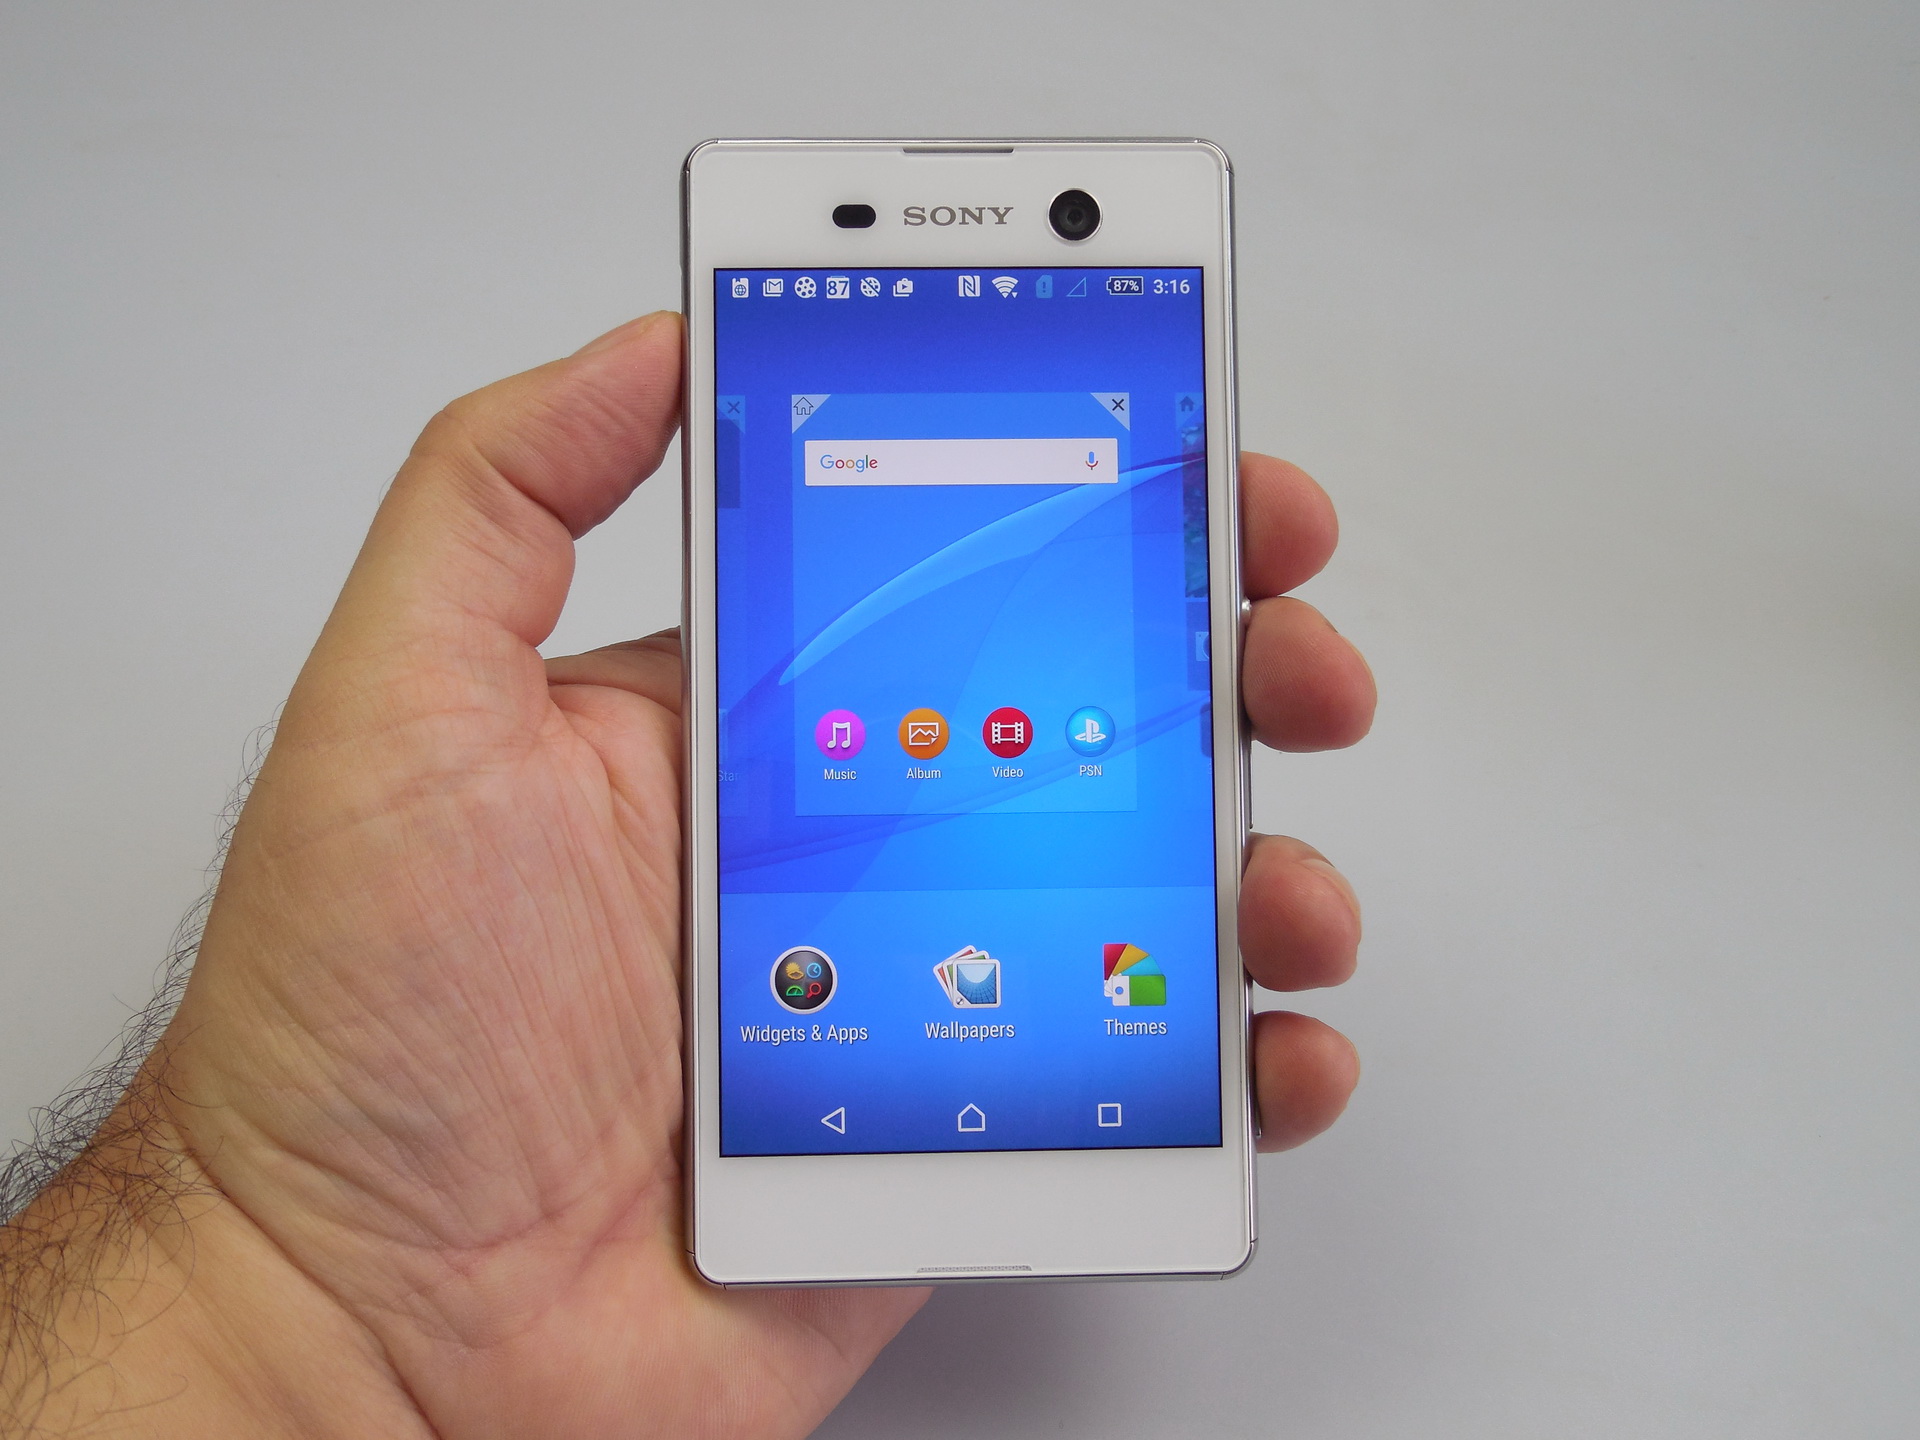 mager Dapperheid Botsing Sony Xperia M5 Dual Review: New Fangled Cameraphone They Said... Still  Good, But Not THAT Good (Video) | GSMDome.com